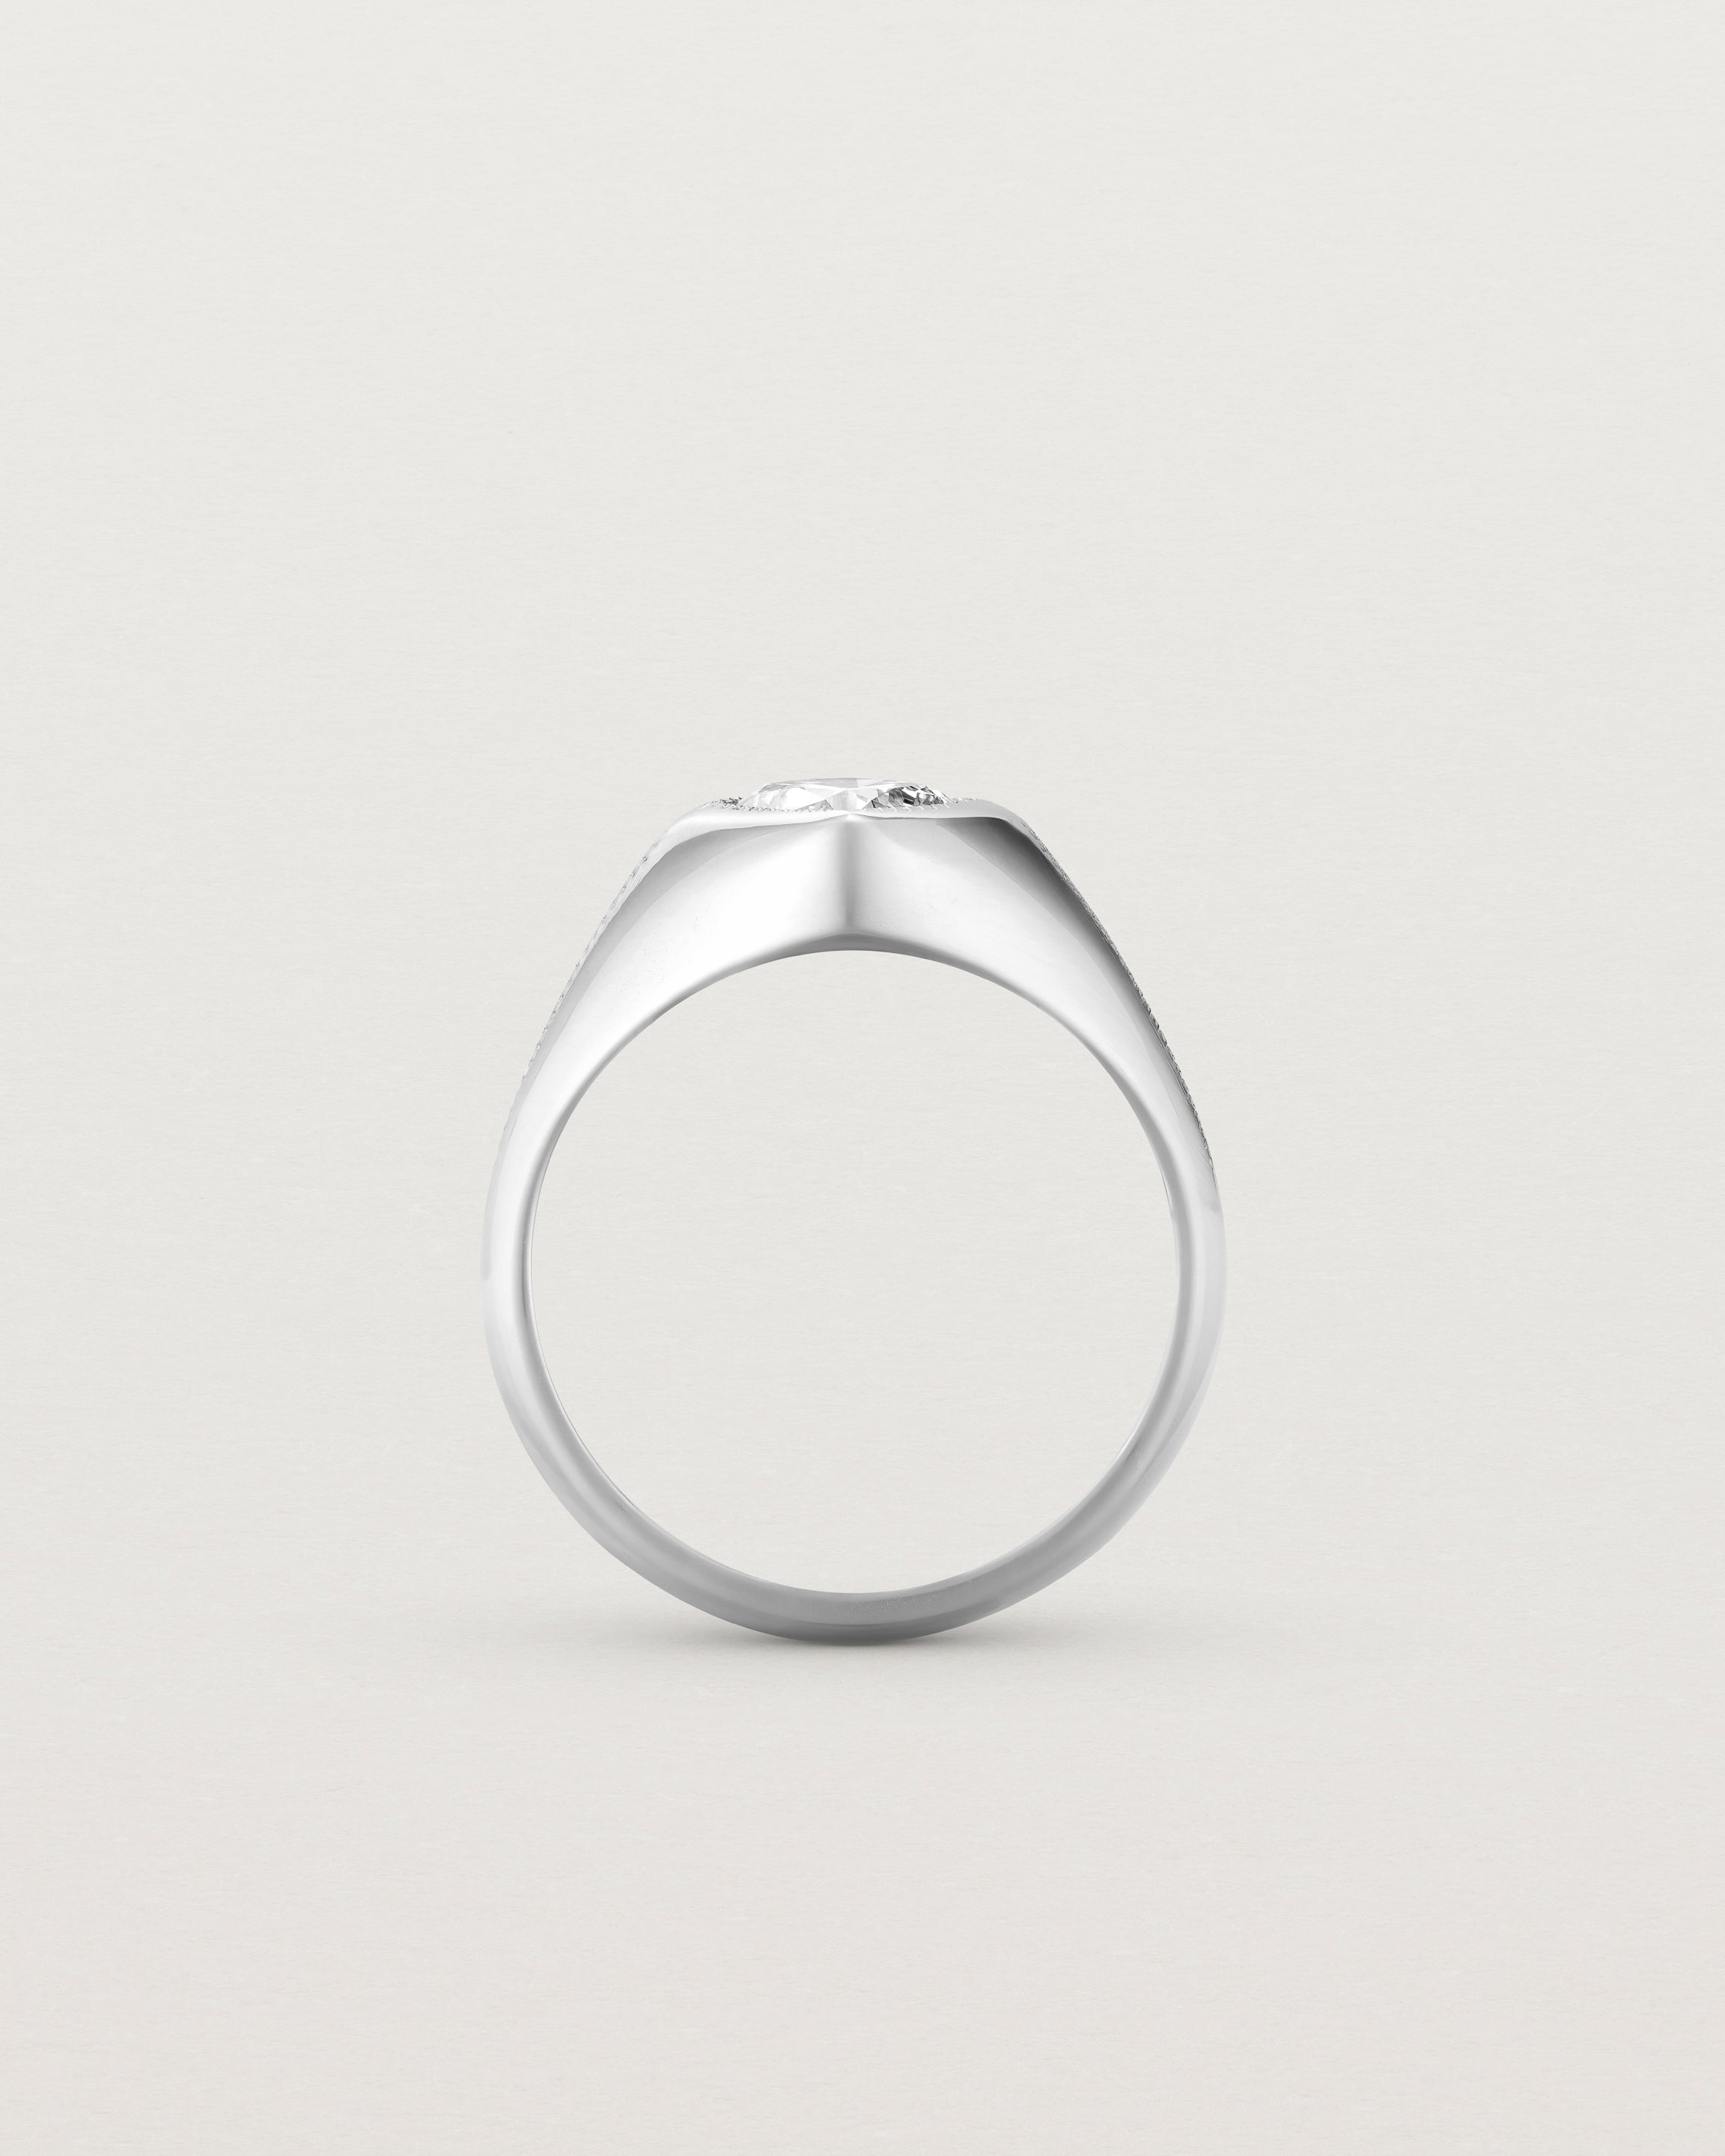 Standing view of the Átlas Cushion Signet | Laboratory Grown Diamond in white gold.